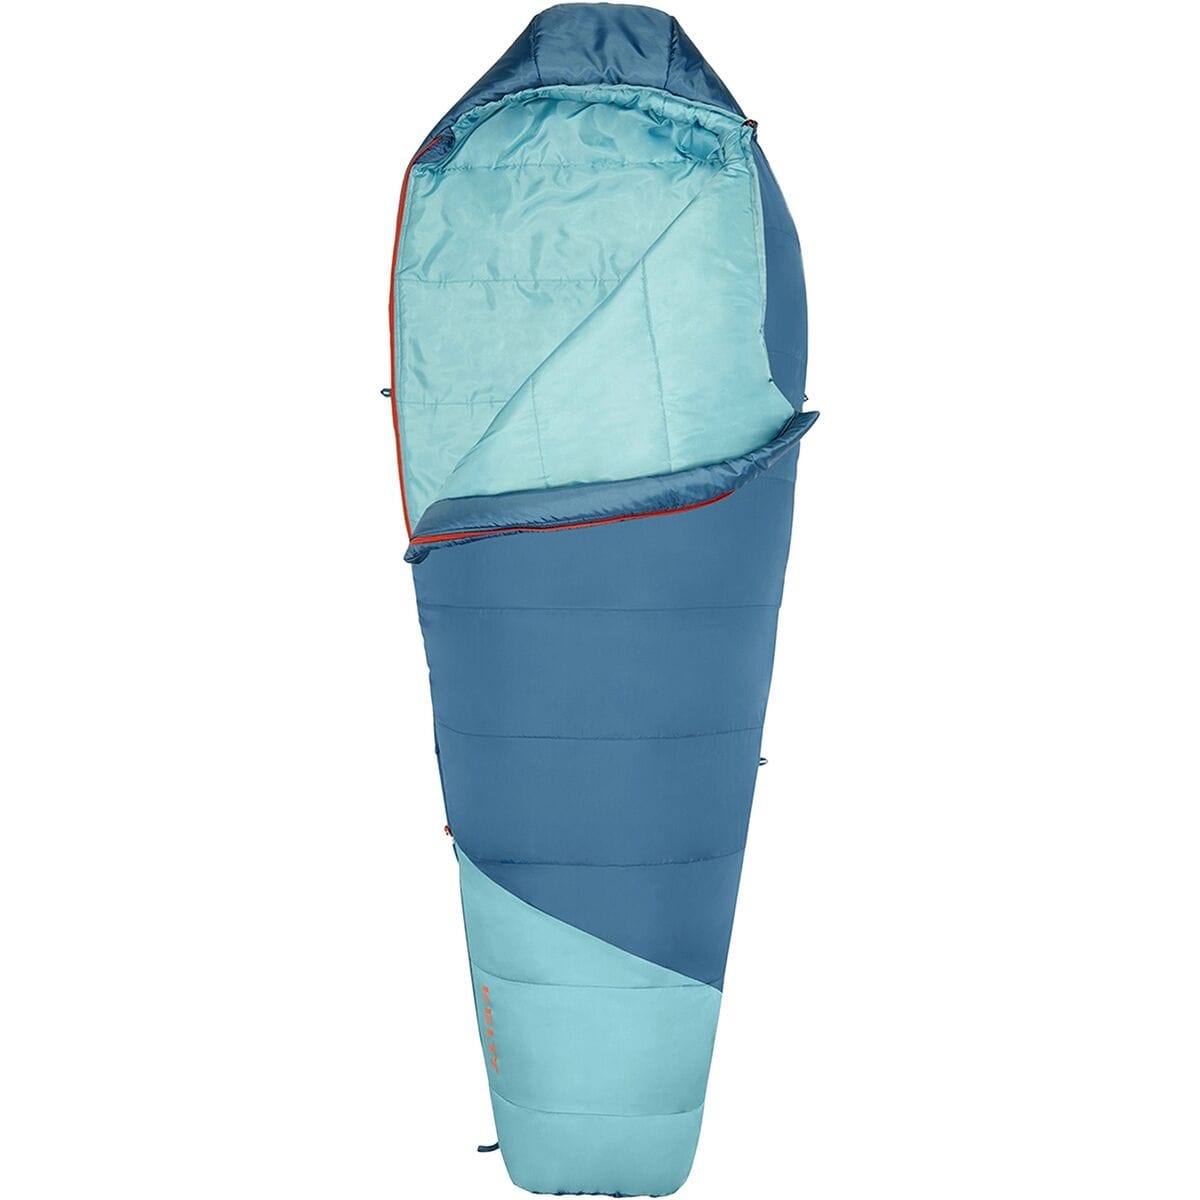 Mistral 20 Sleeping Bag: 20F Synthetic - Women